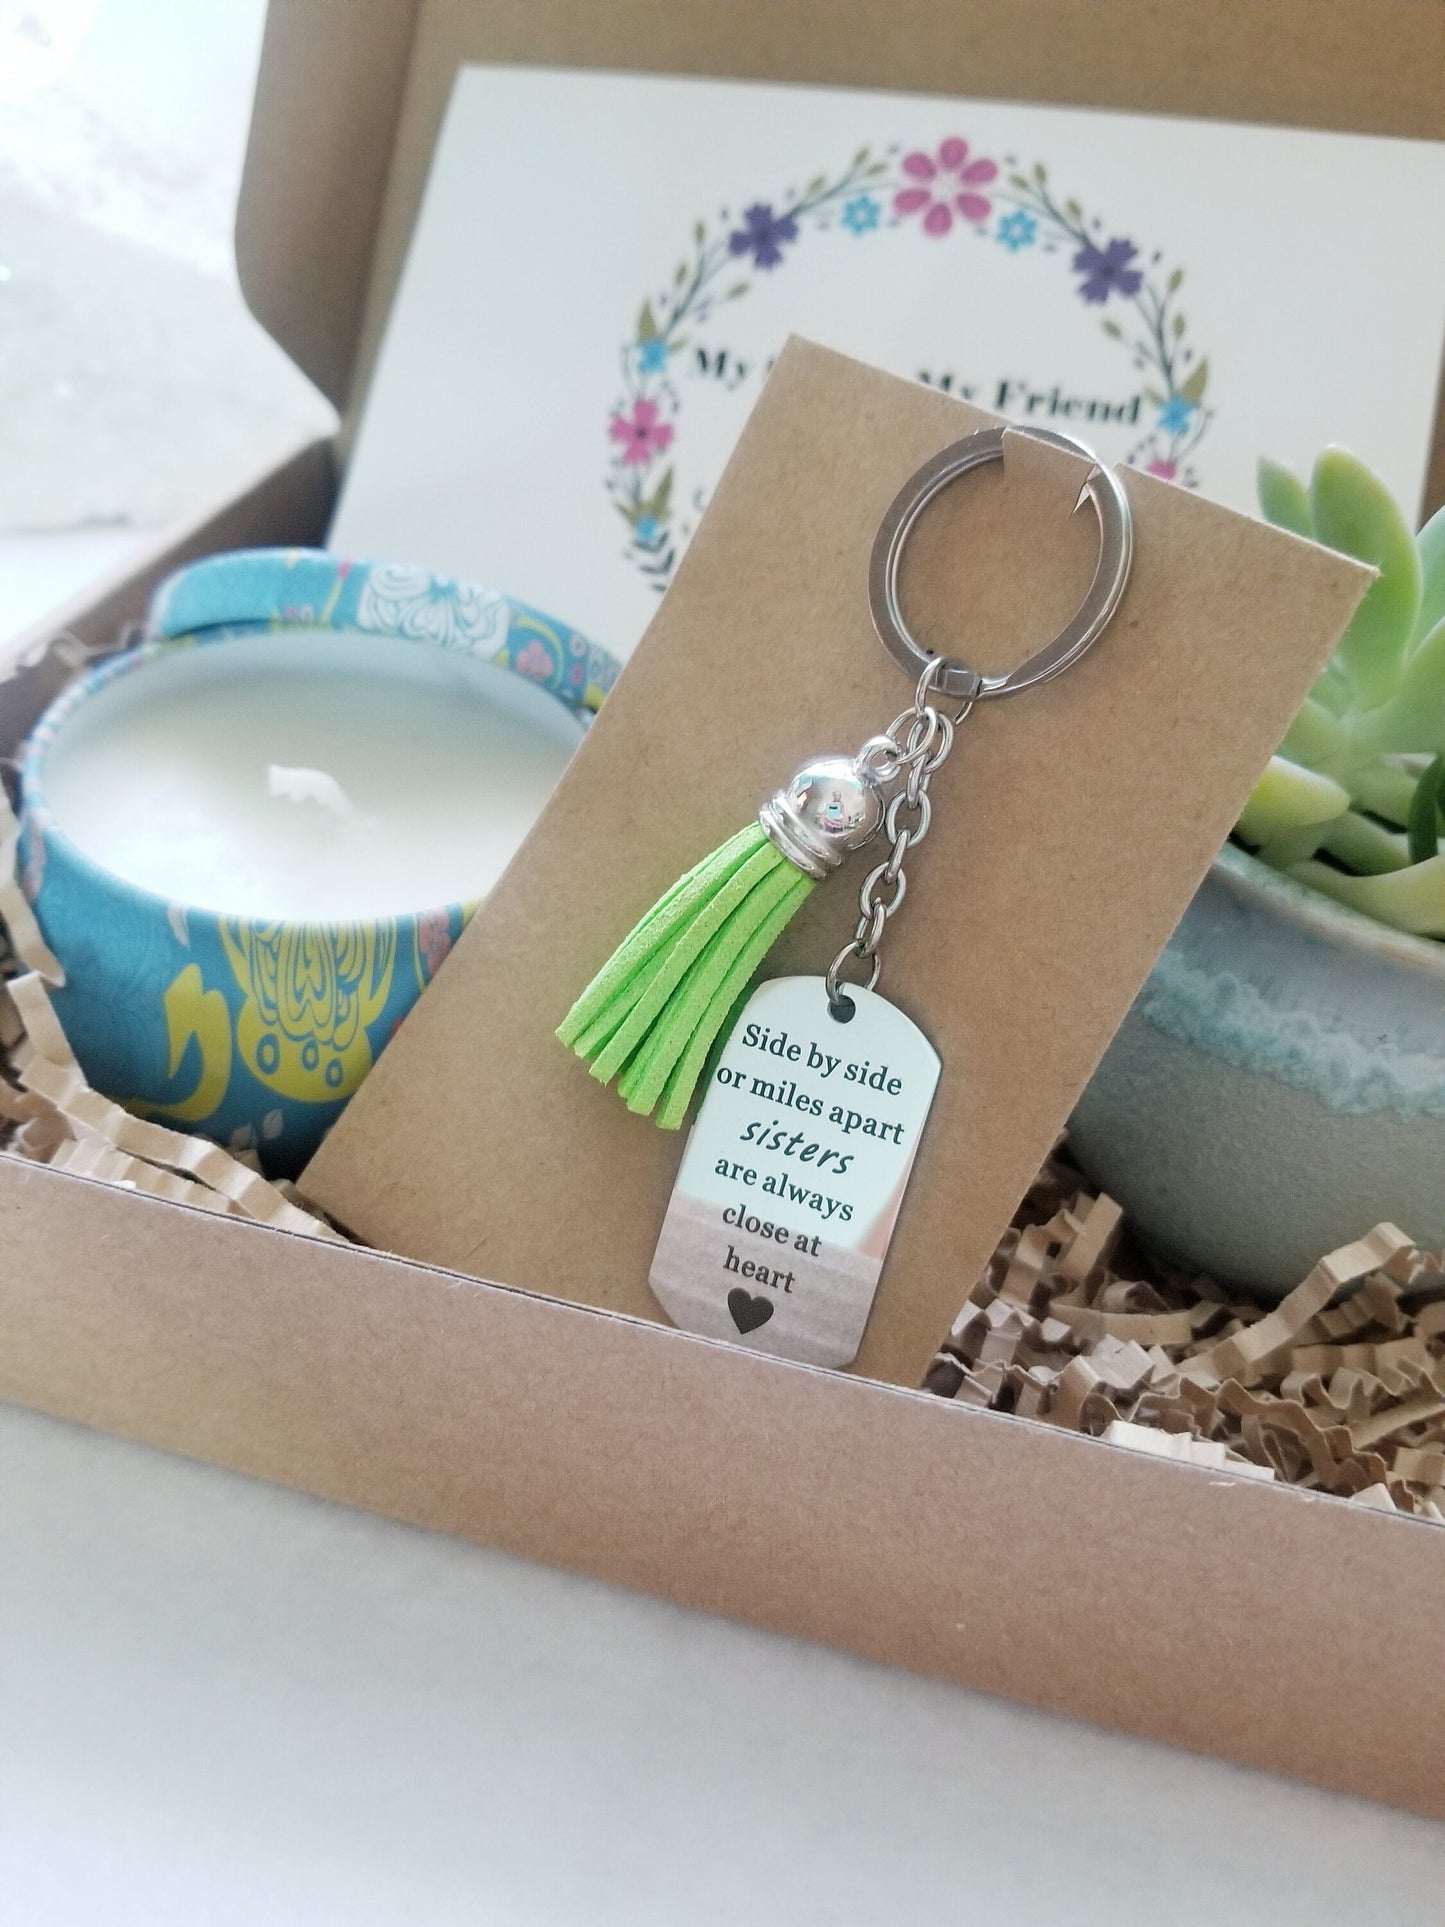 Sisters gift set - mini succulent, candle & personalized keychain